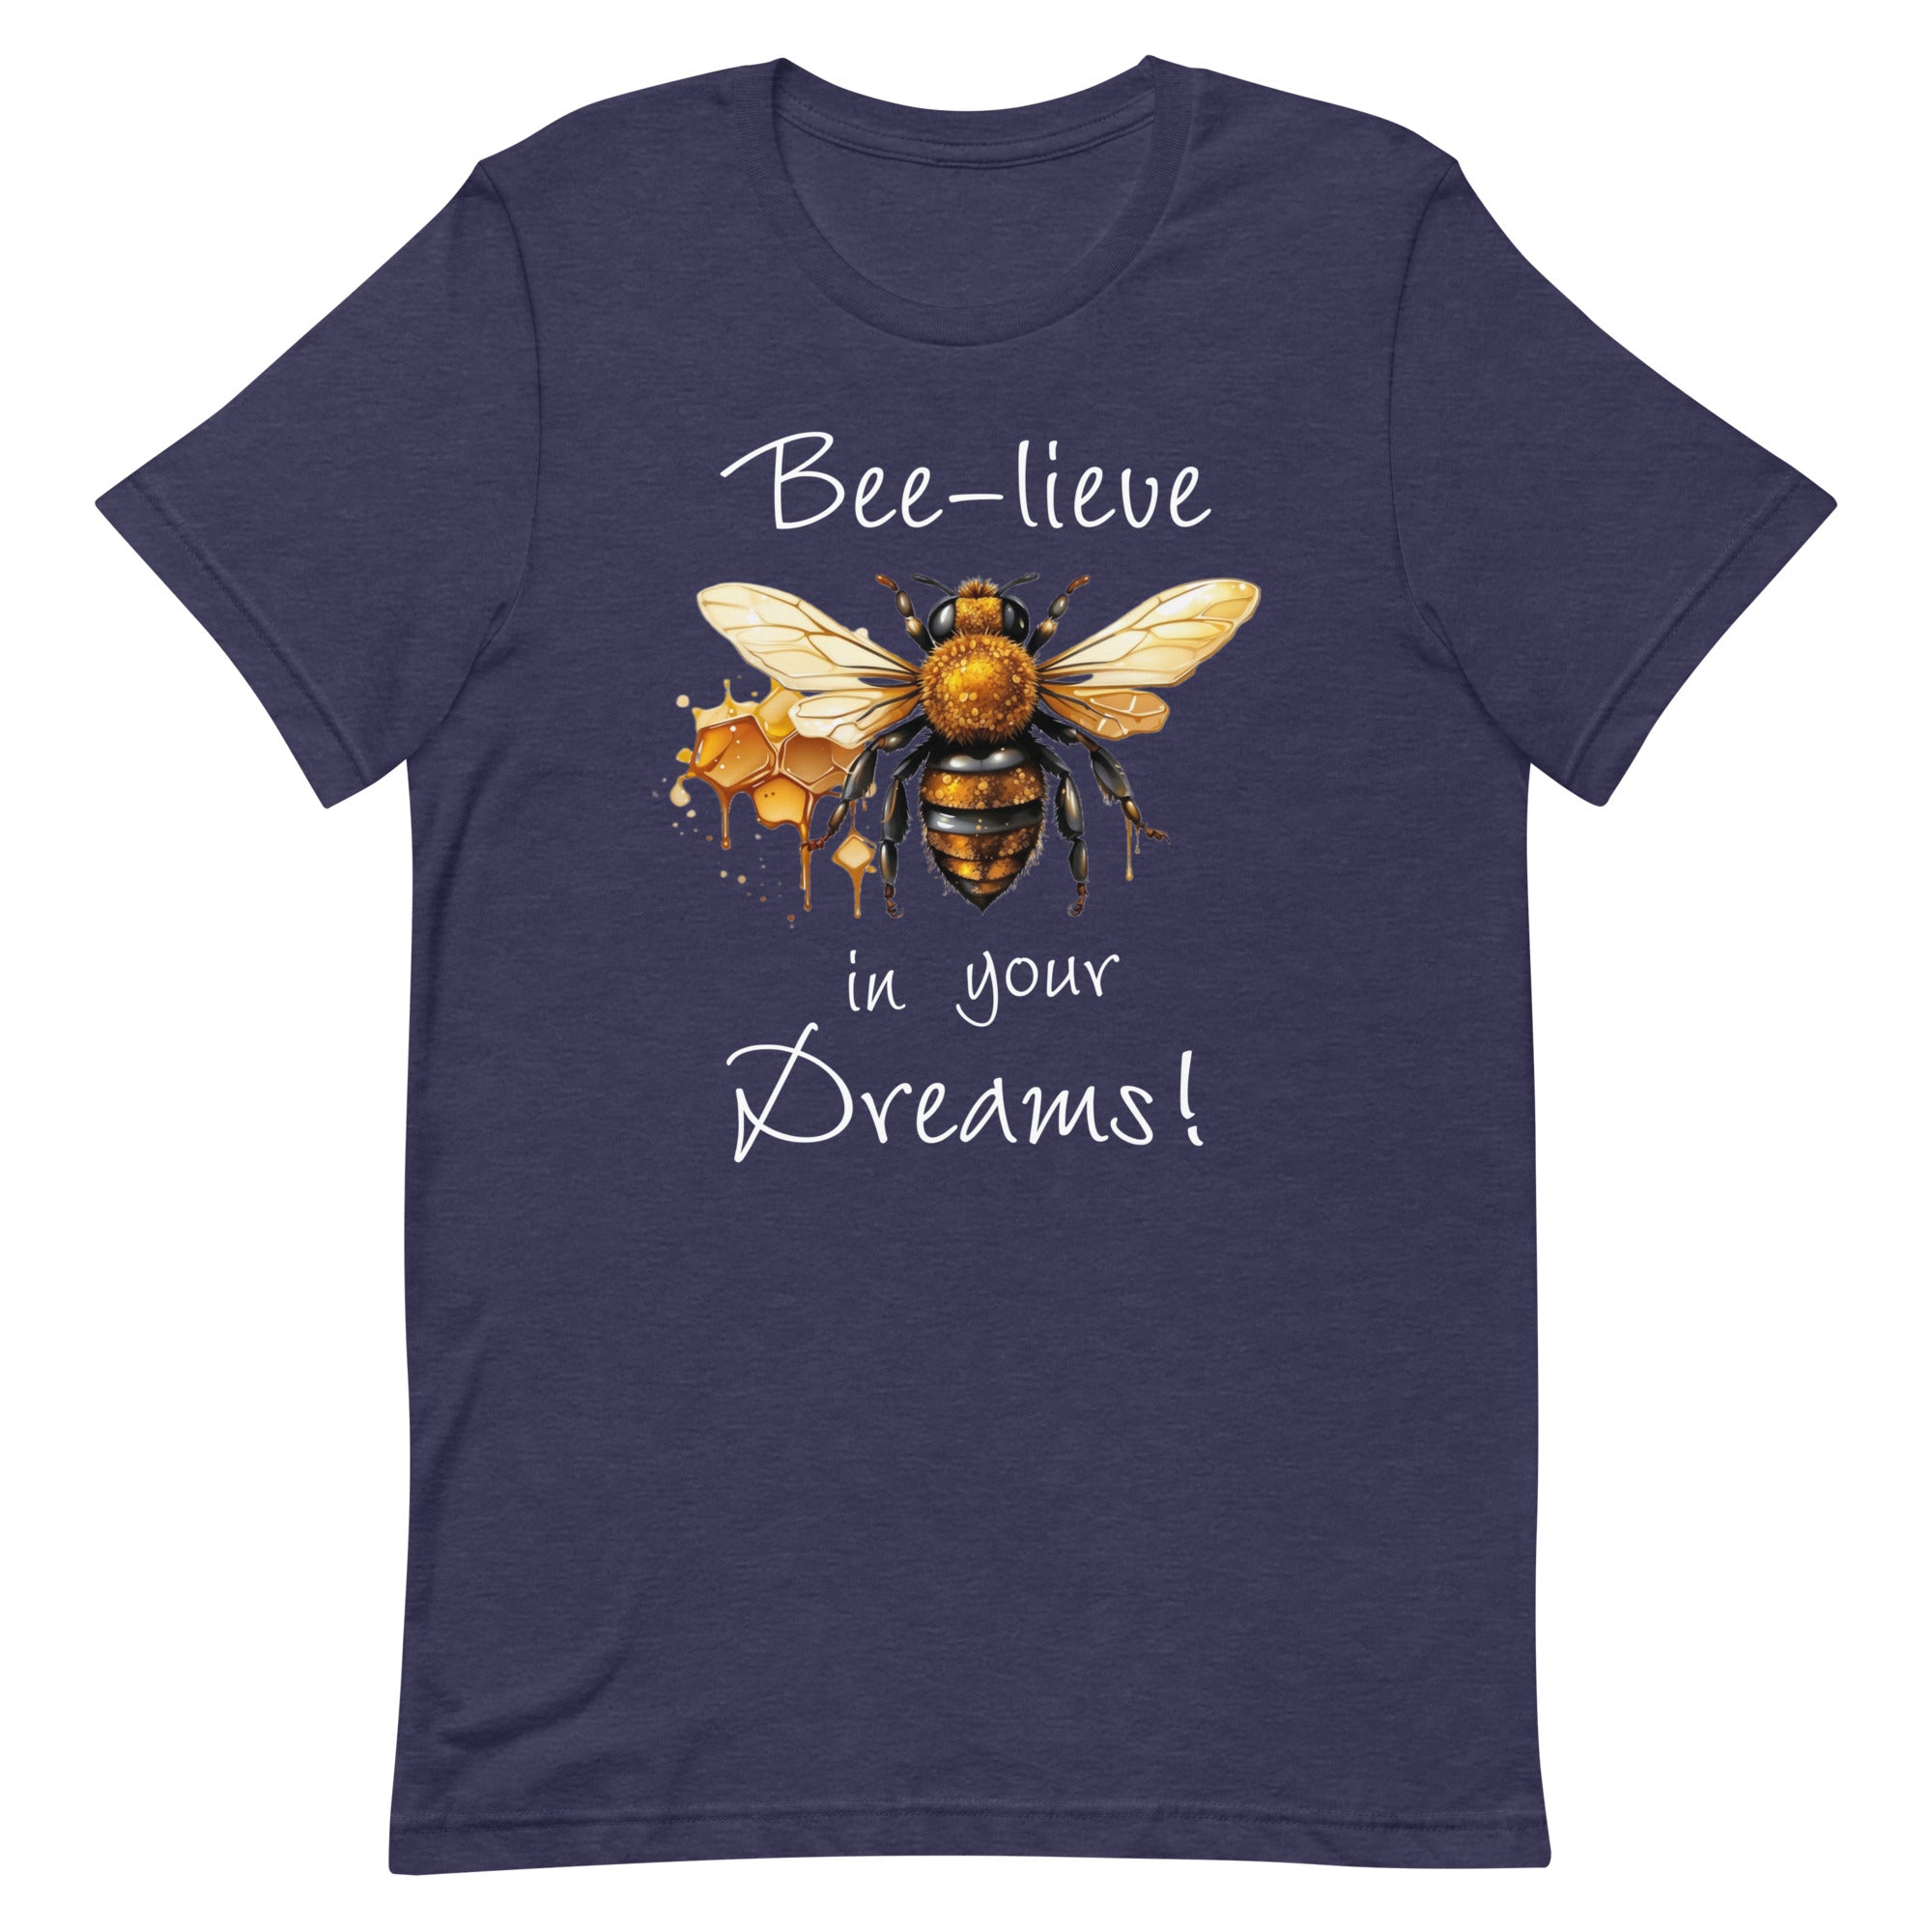 Bee-lieve in Your Dreams T-Shirt, Gift for Bee Lovers Heather Midnight Navy L XL S M DenBox